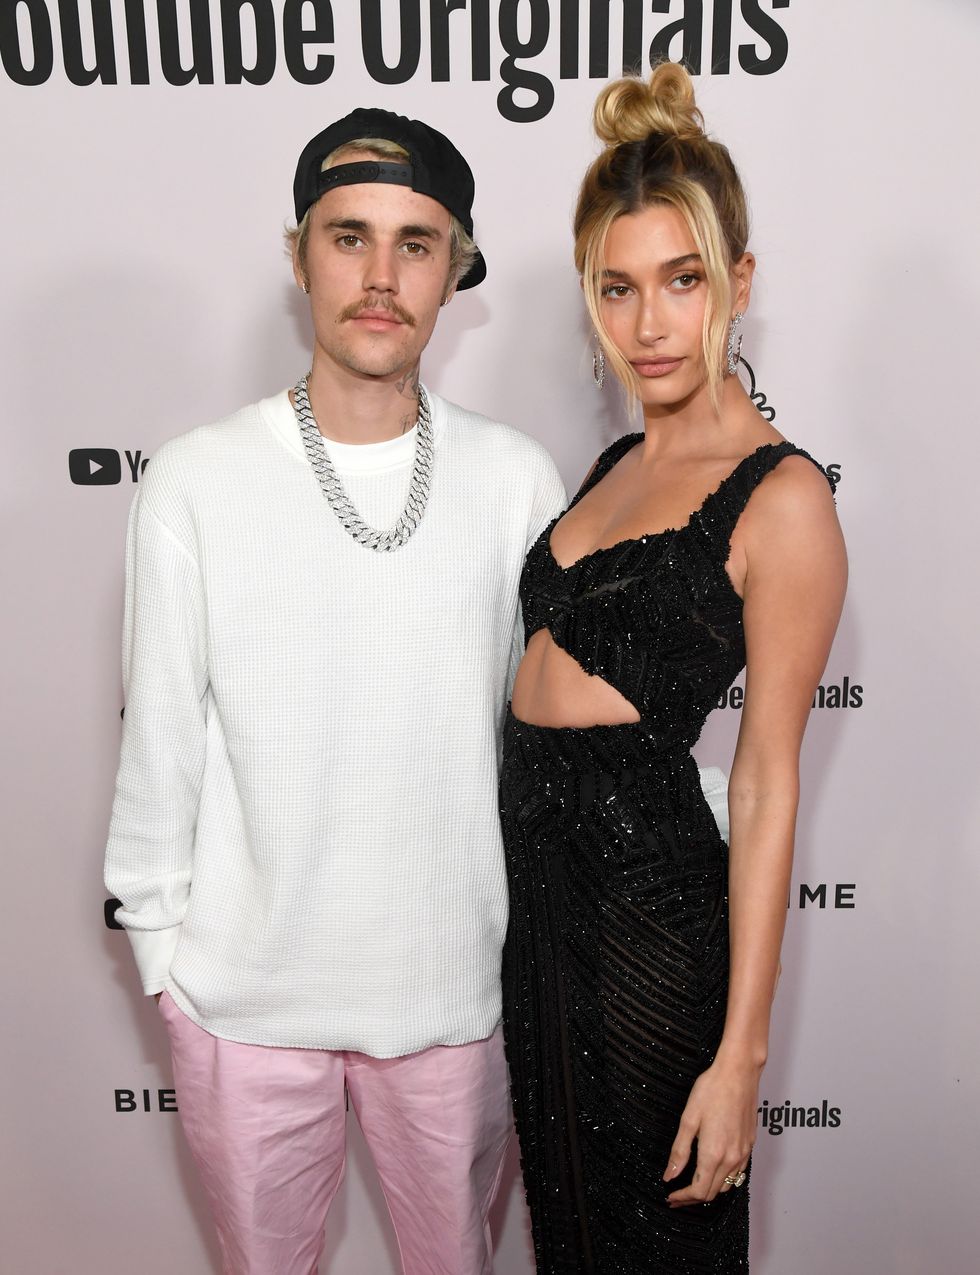 westwood, california   january 27 justin bieber and hailey rhode bieber attend youtube originals justin bieber seasons premiere at regency bruin theater on january 27, 2020 in westwood, california photo by kevin mazurgetty images for youtube originals